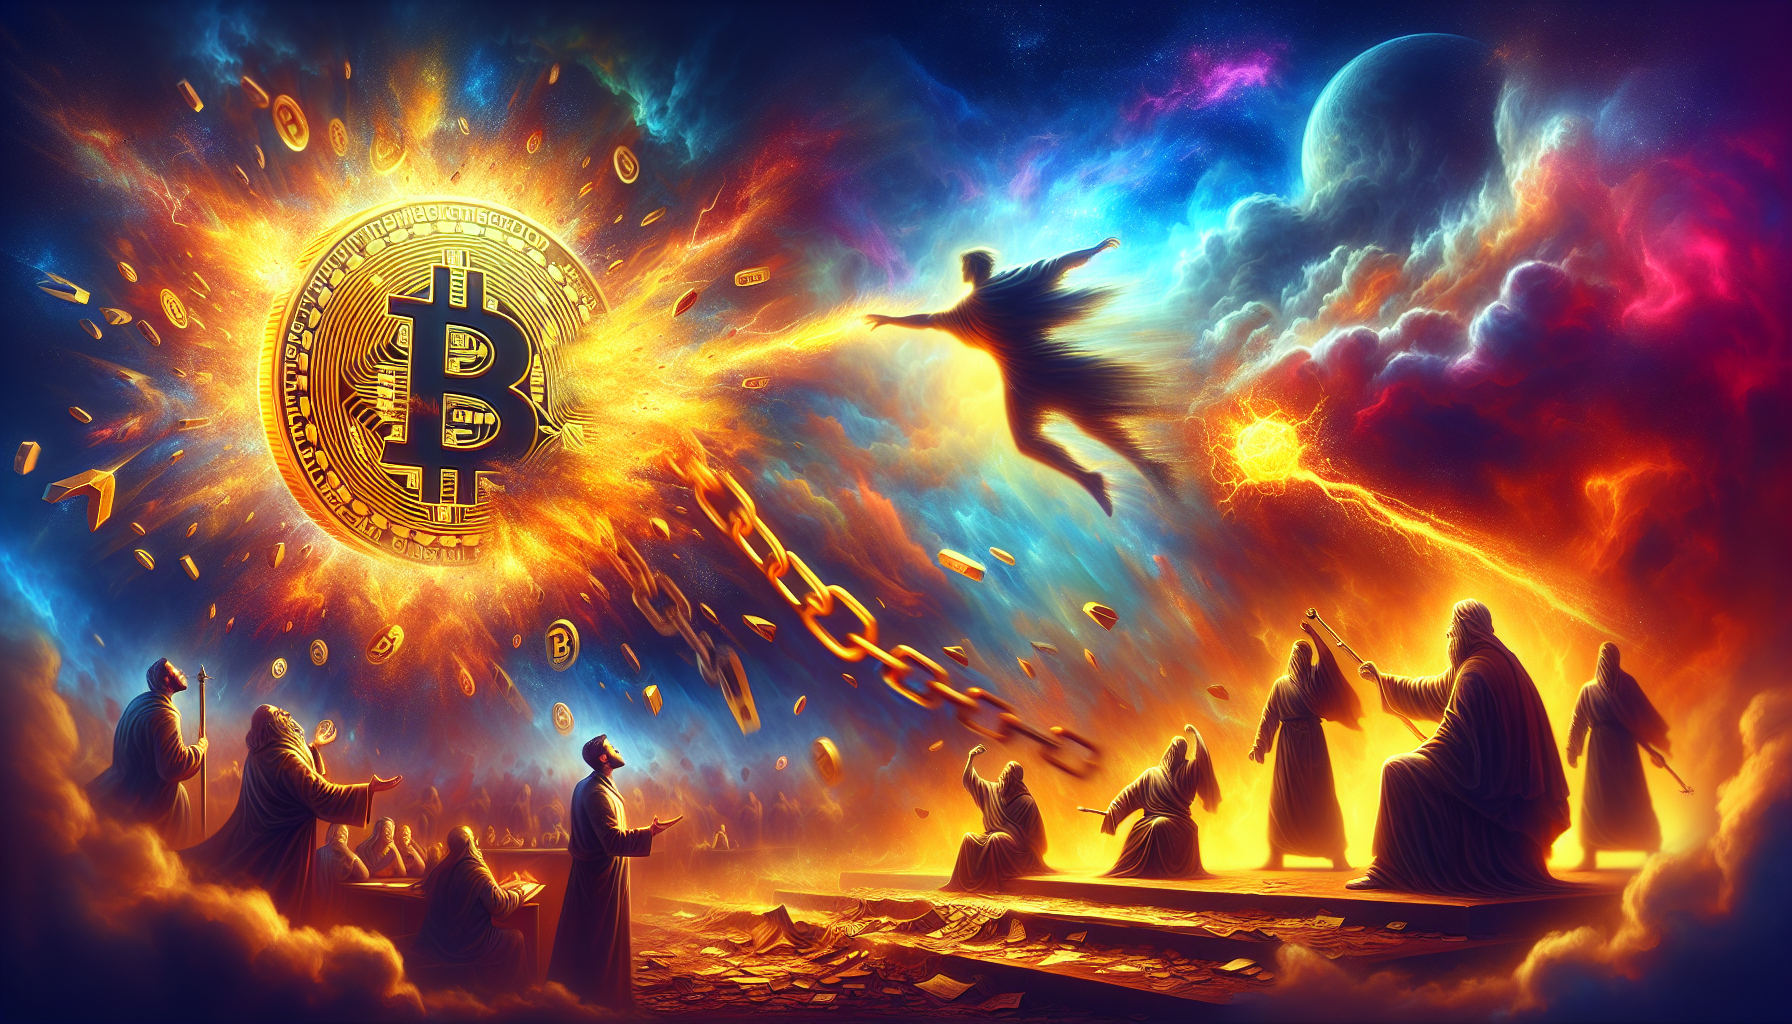 The Future of Bitcoin Should be Shaped by Market Forces, Not Censorship